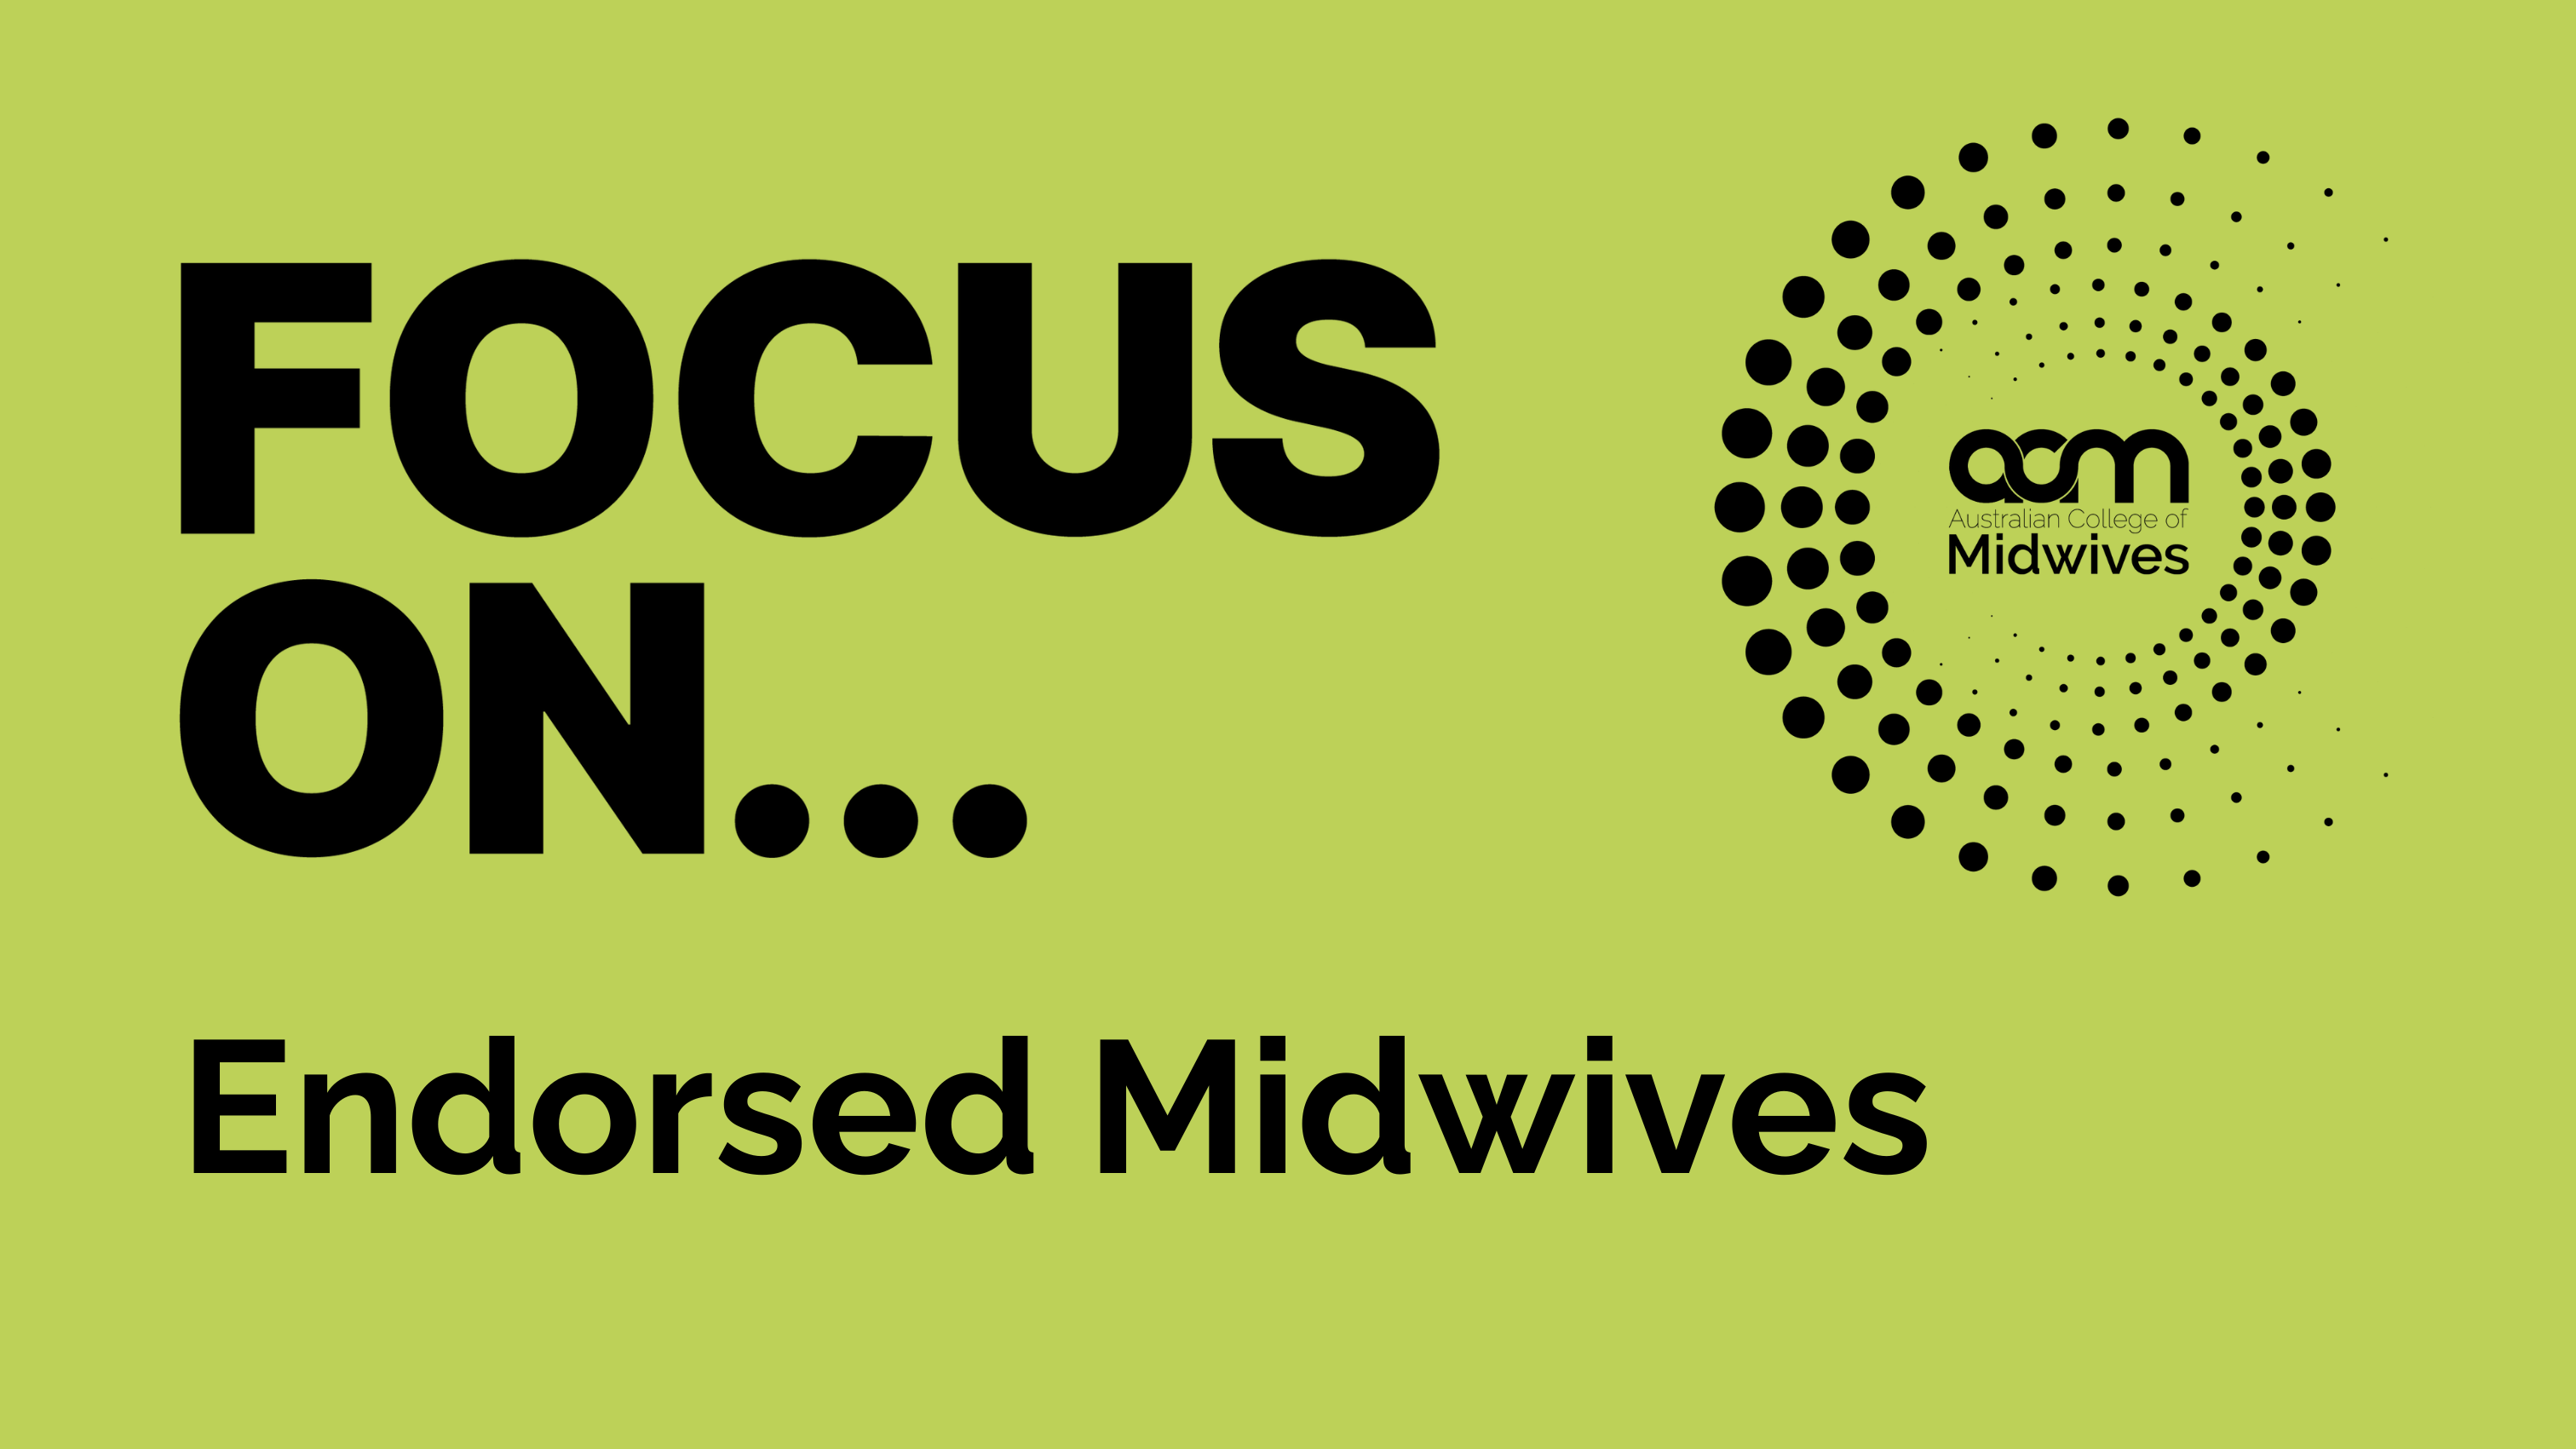 Focus On... Endorsed Midwives